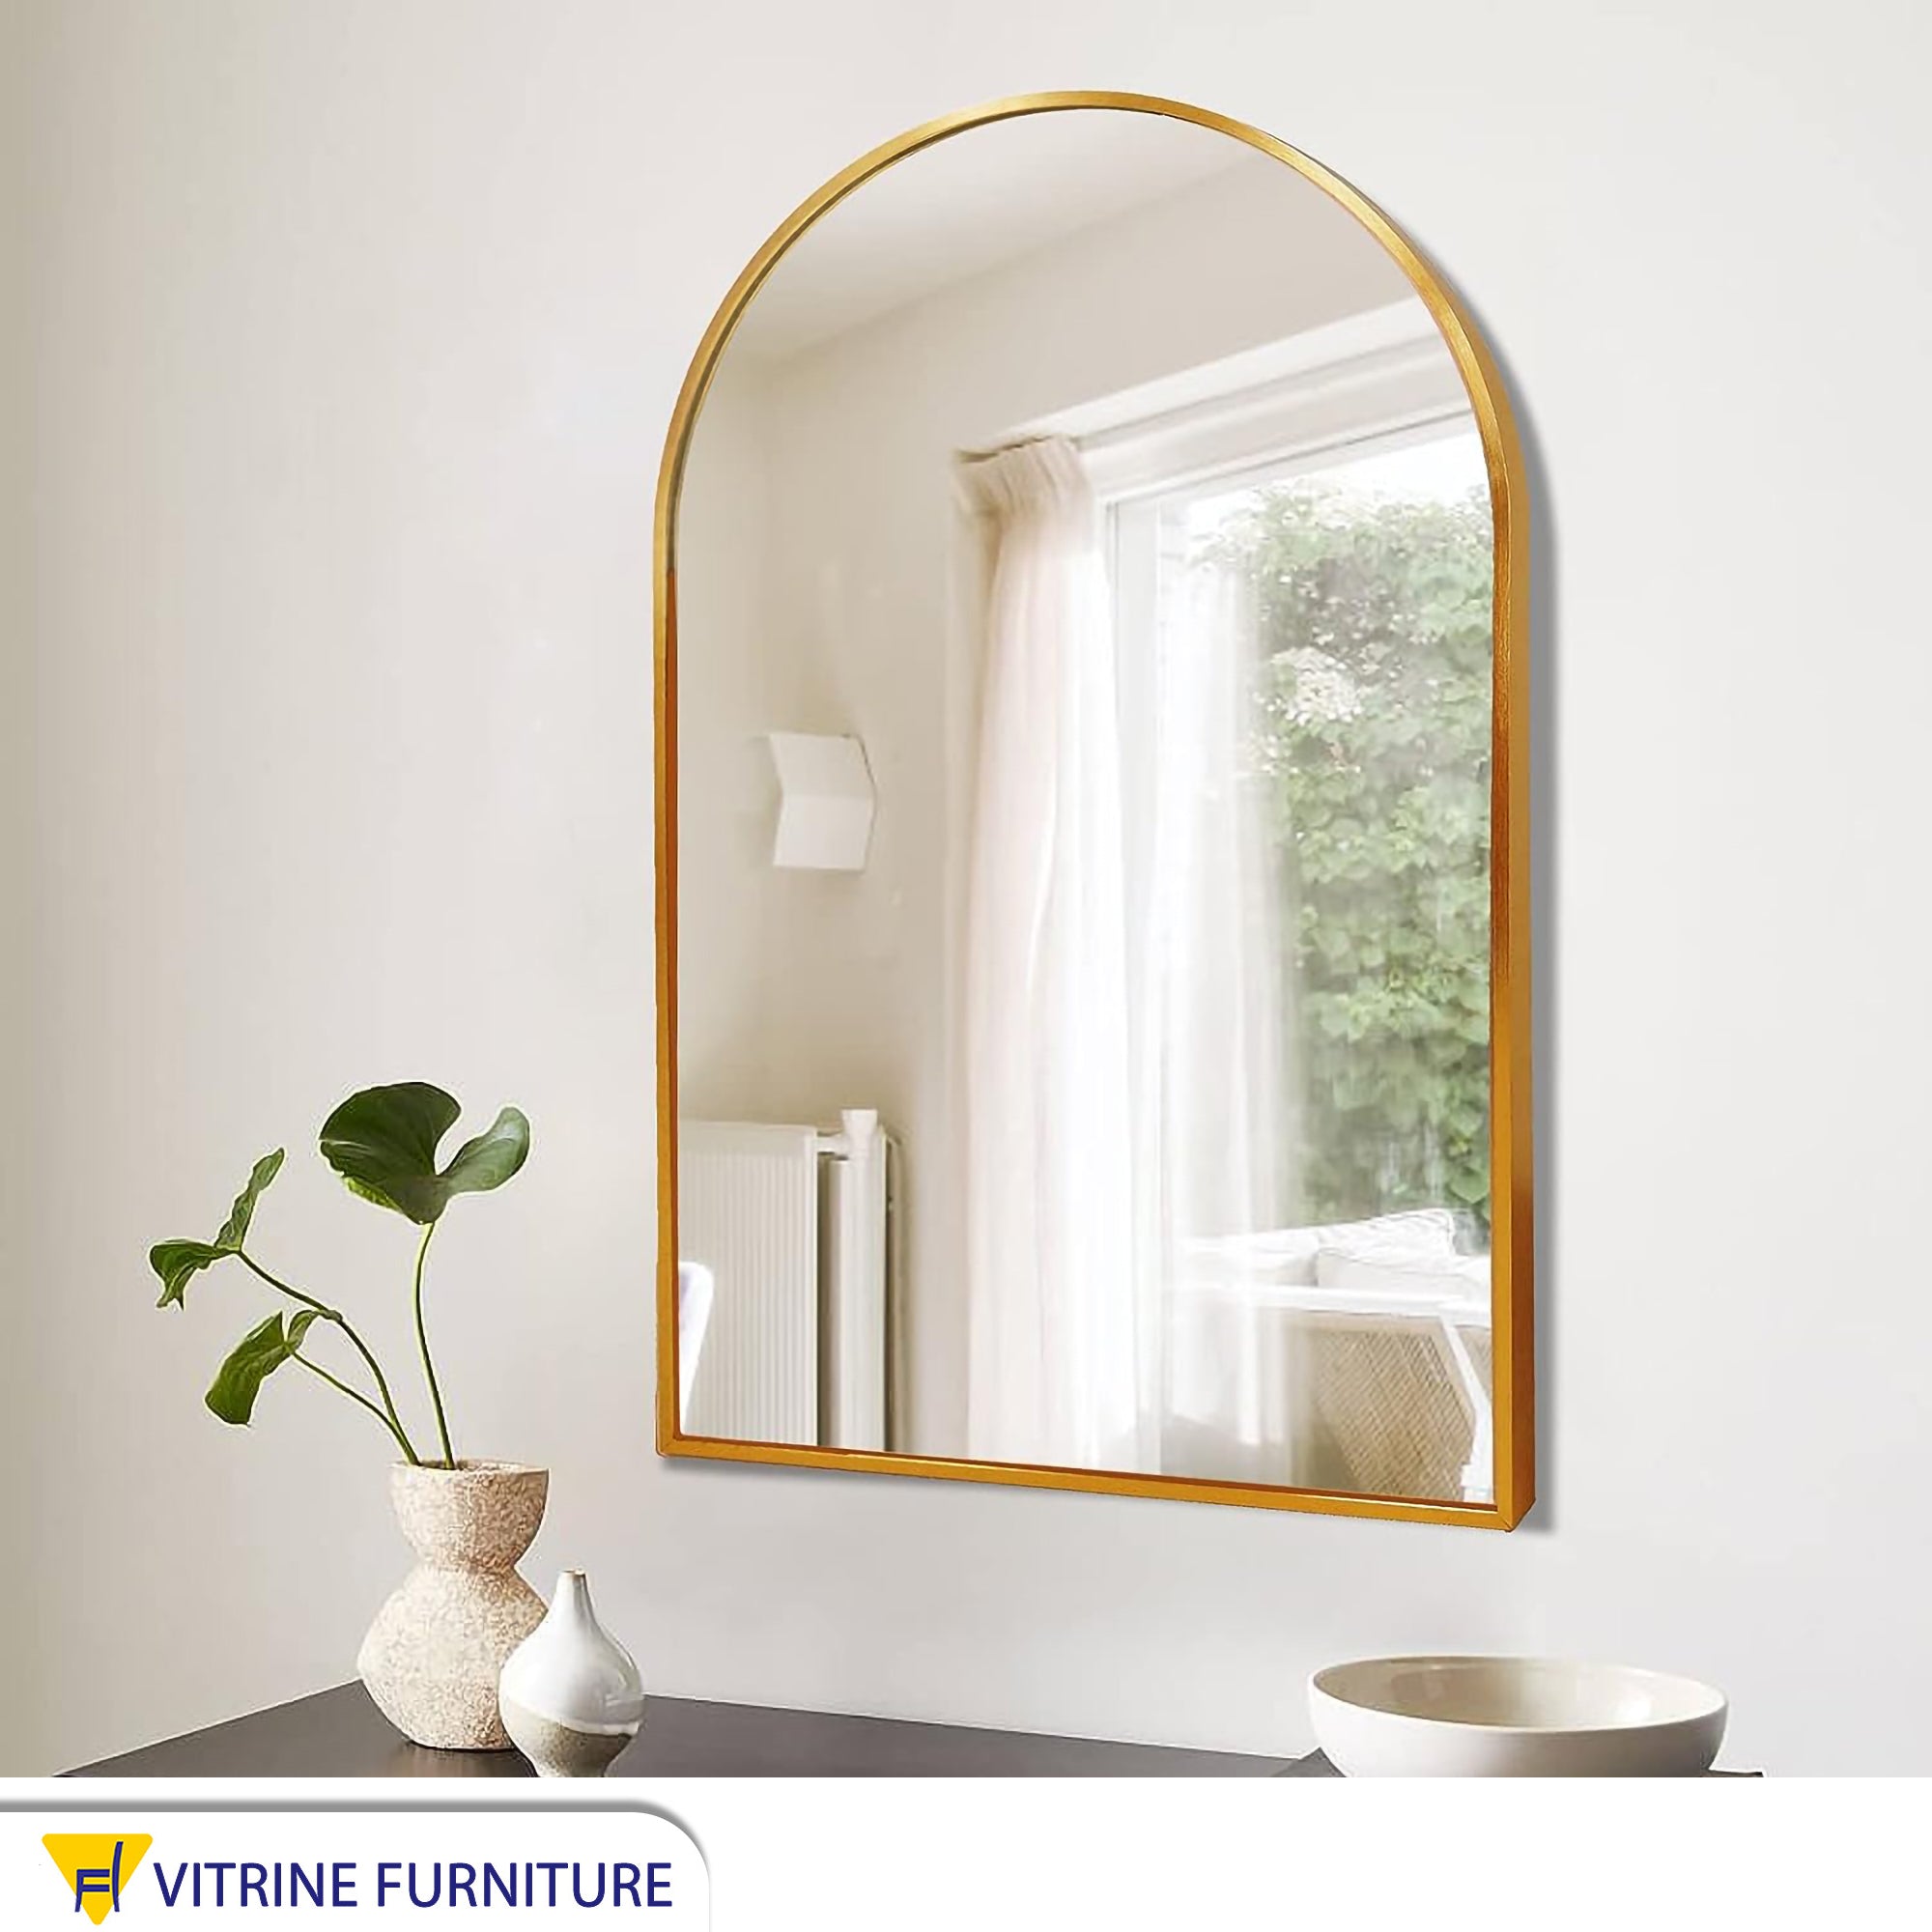 Arch mirror 60*80 with a golden wood frame